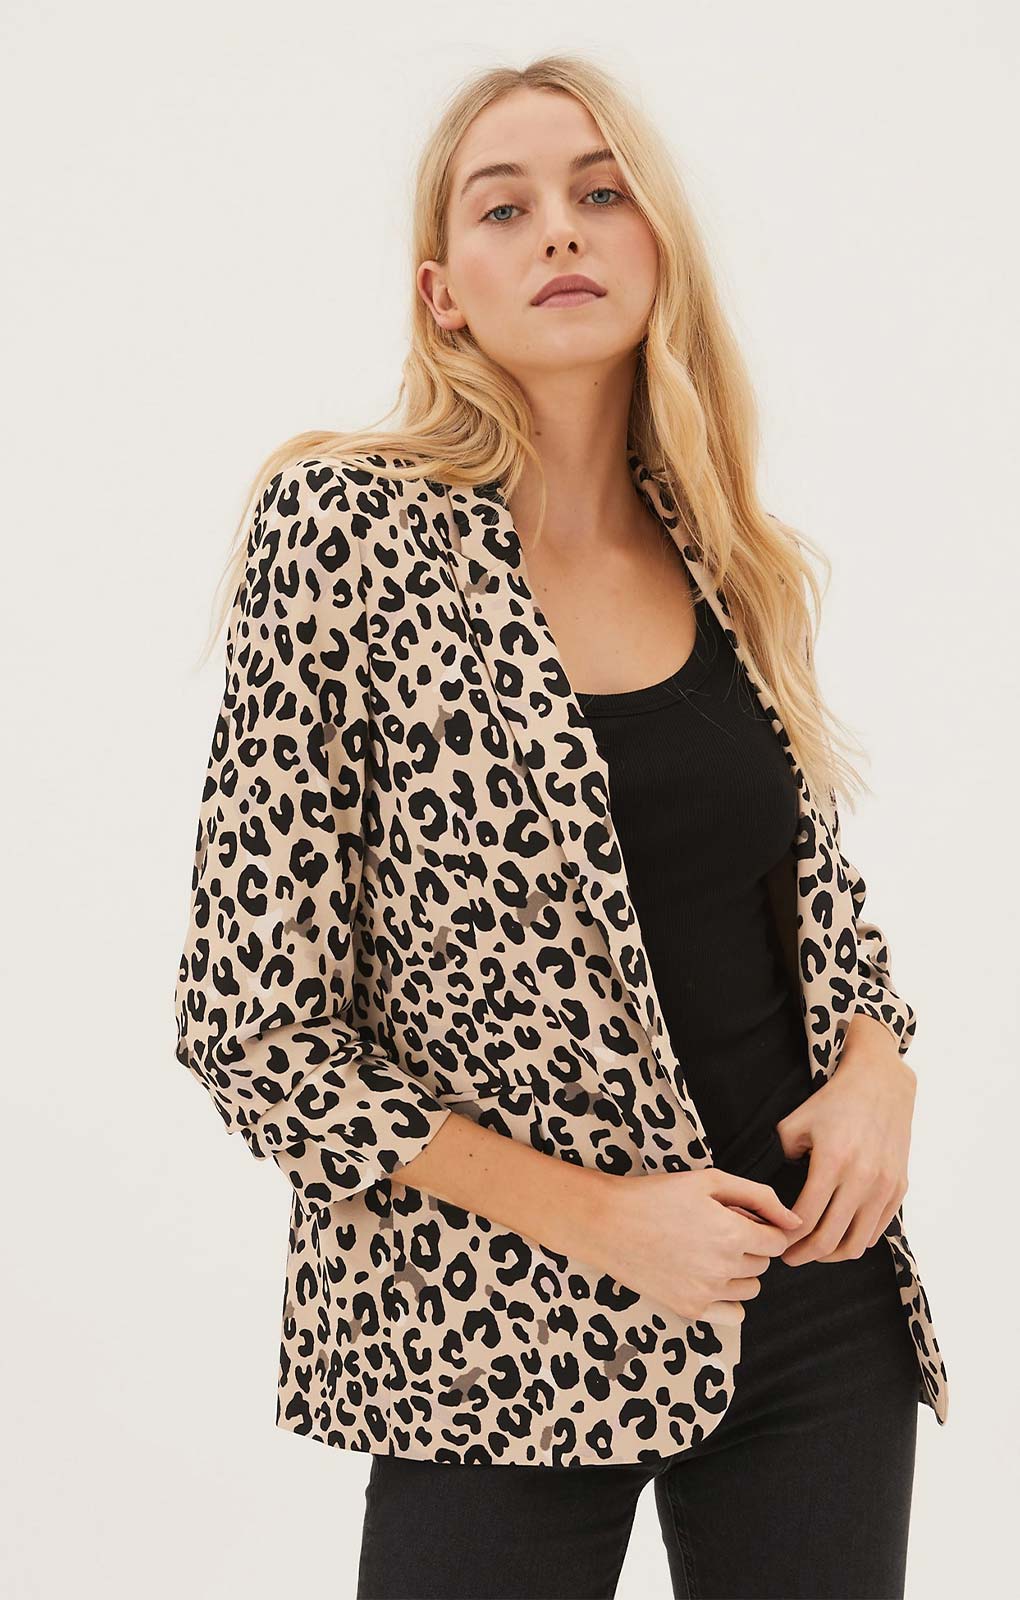 M&S Leopard Crepe Ruched Sleeve Jacket product image